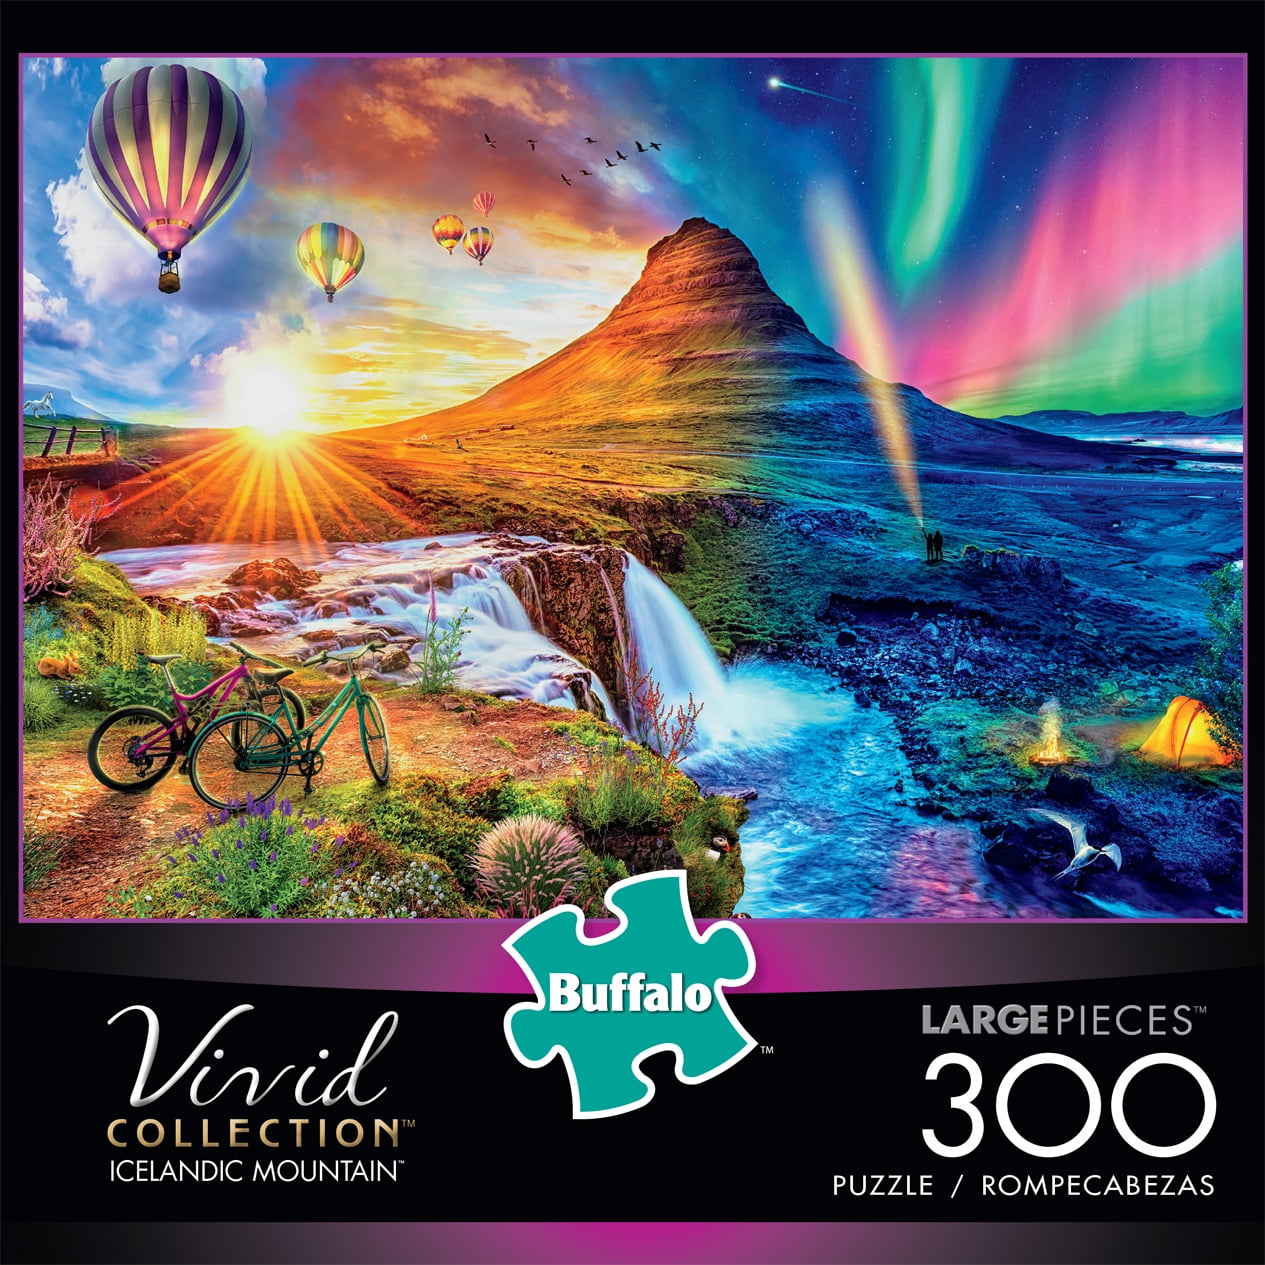 Icelandic Mountain 300 Large Piece Jigsaw Puzzle Ship for sale online Buffalo Games